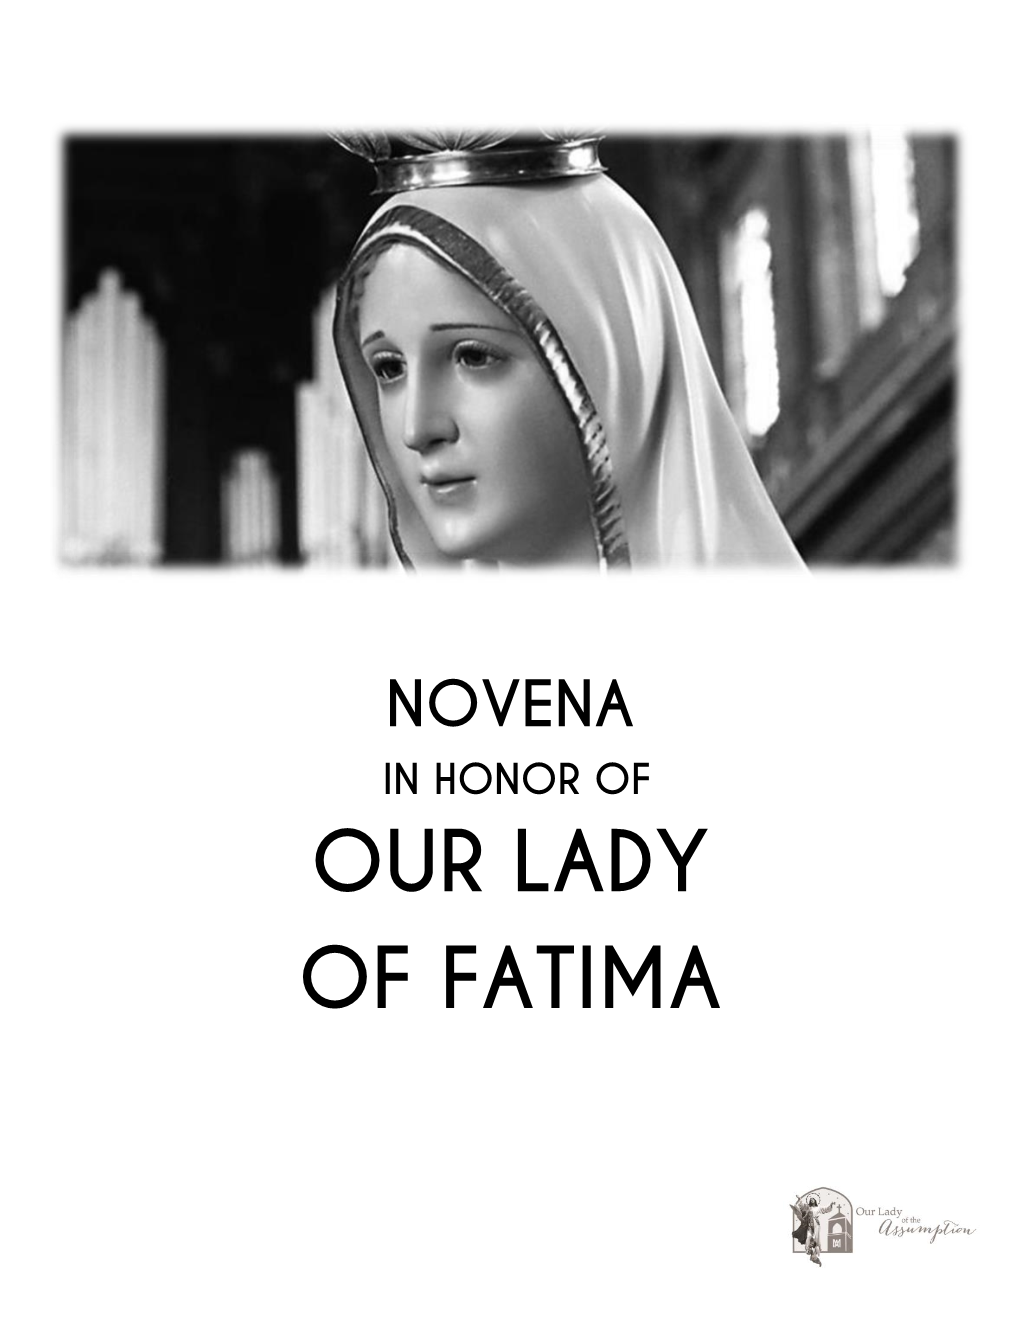 Novena in Honor of Our Lady of Fatima